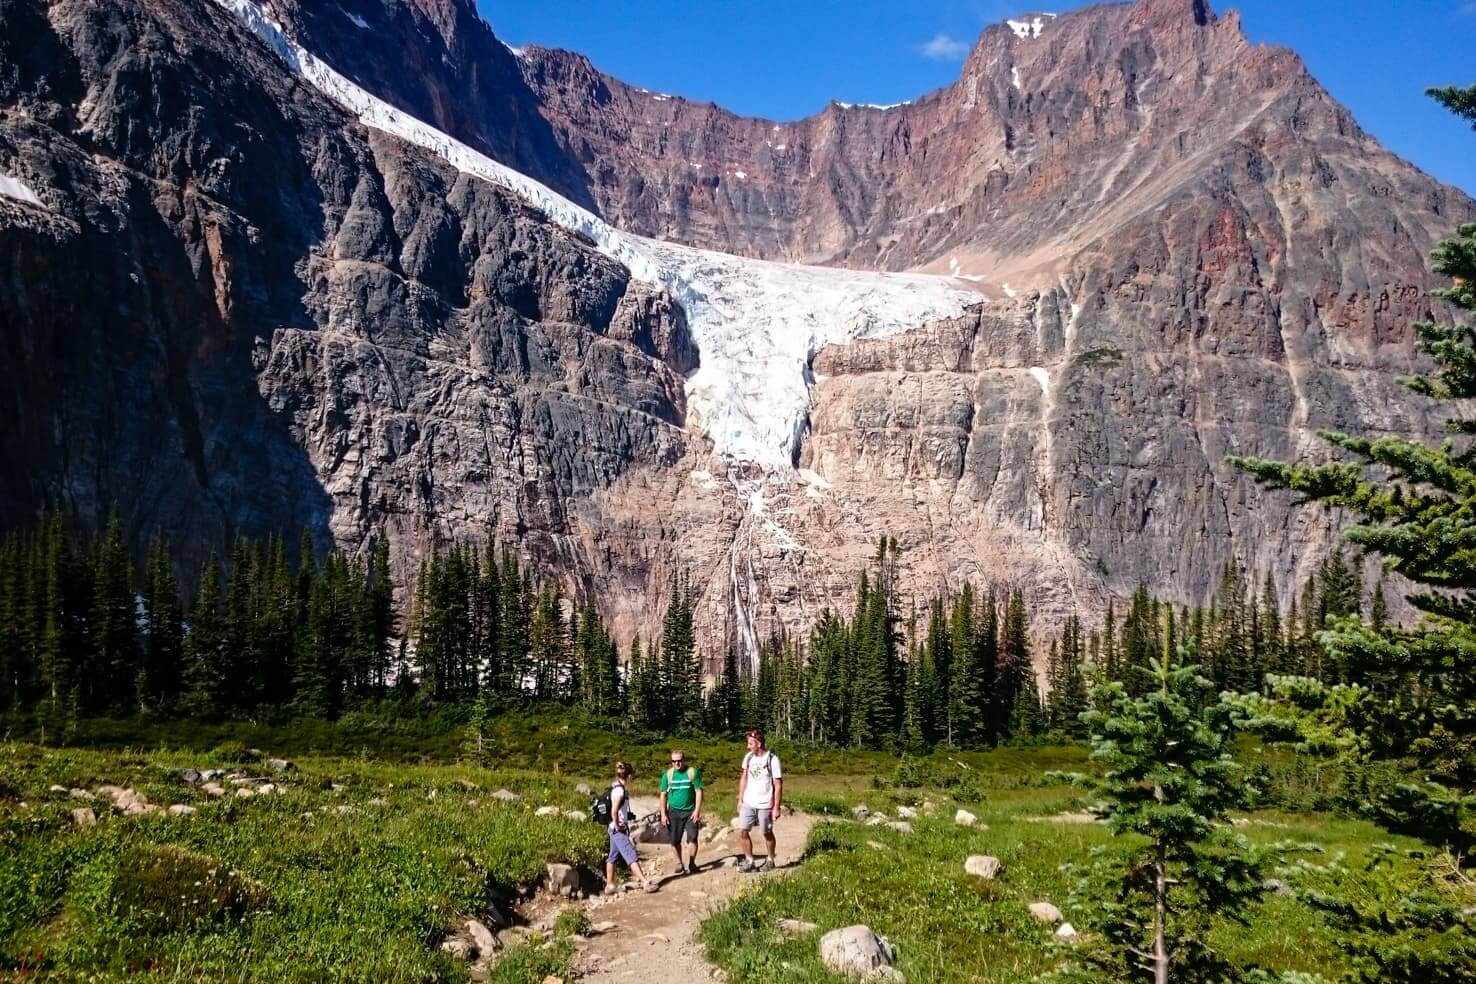 100 best things to do in Banff National Park, Canada - Hike to Mount Edith Cavell